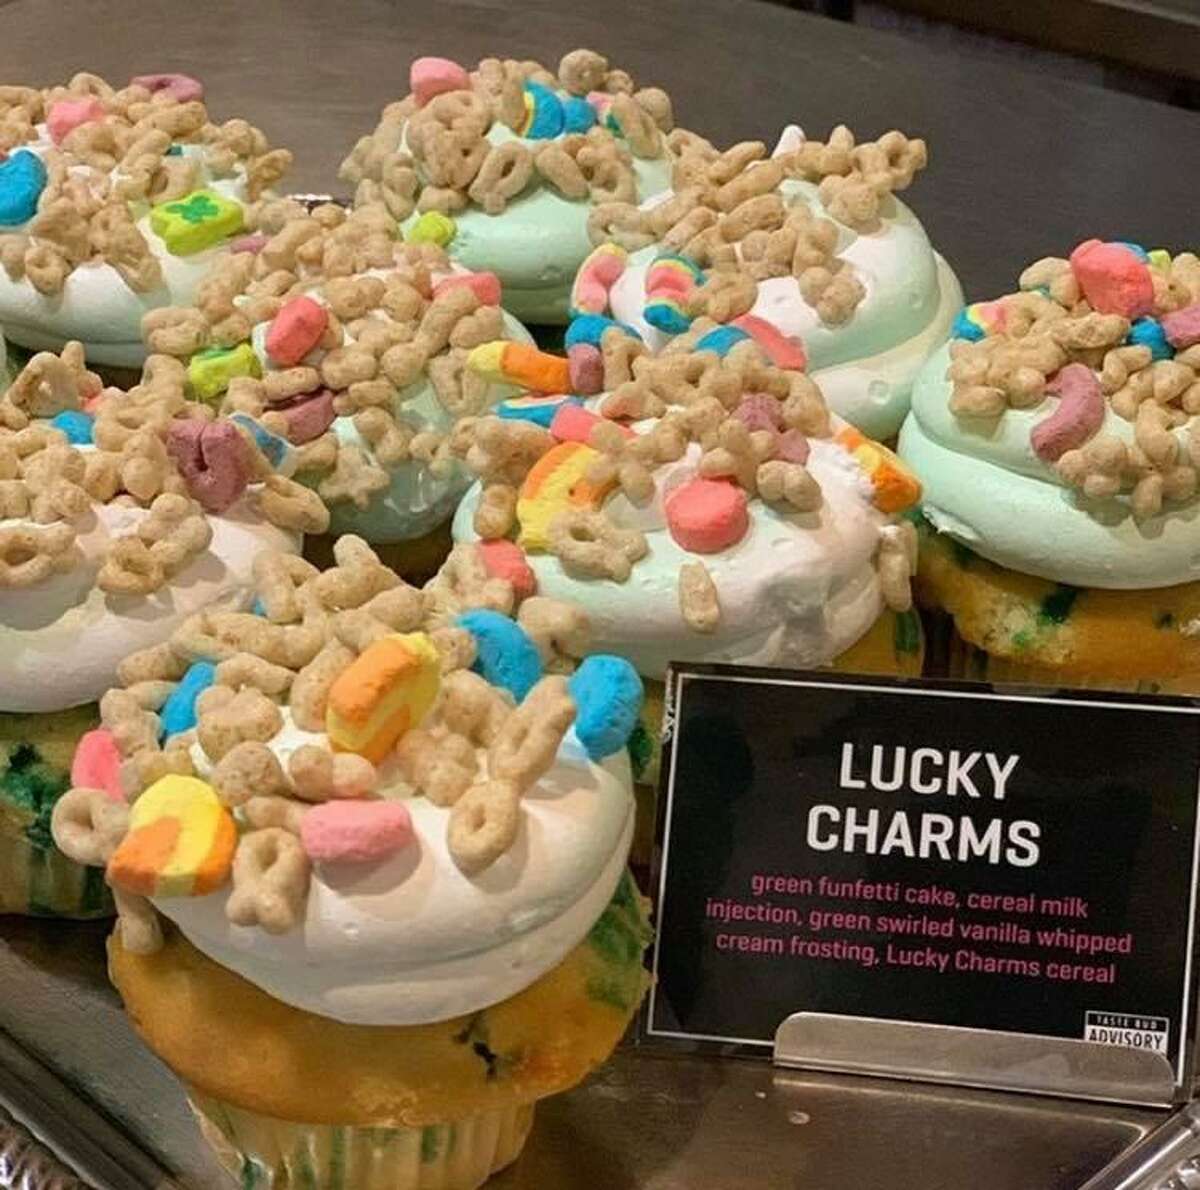 NoRA Cupcake Co. features its popular flavored cakes daily, and rotates monthly six of its speciality flavors, including Lucky Charms from its cereal-inspired line.